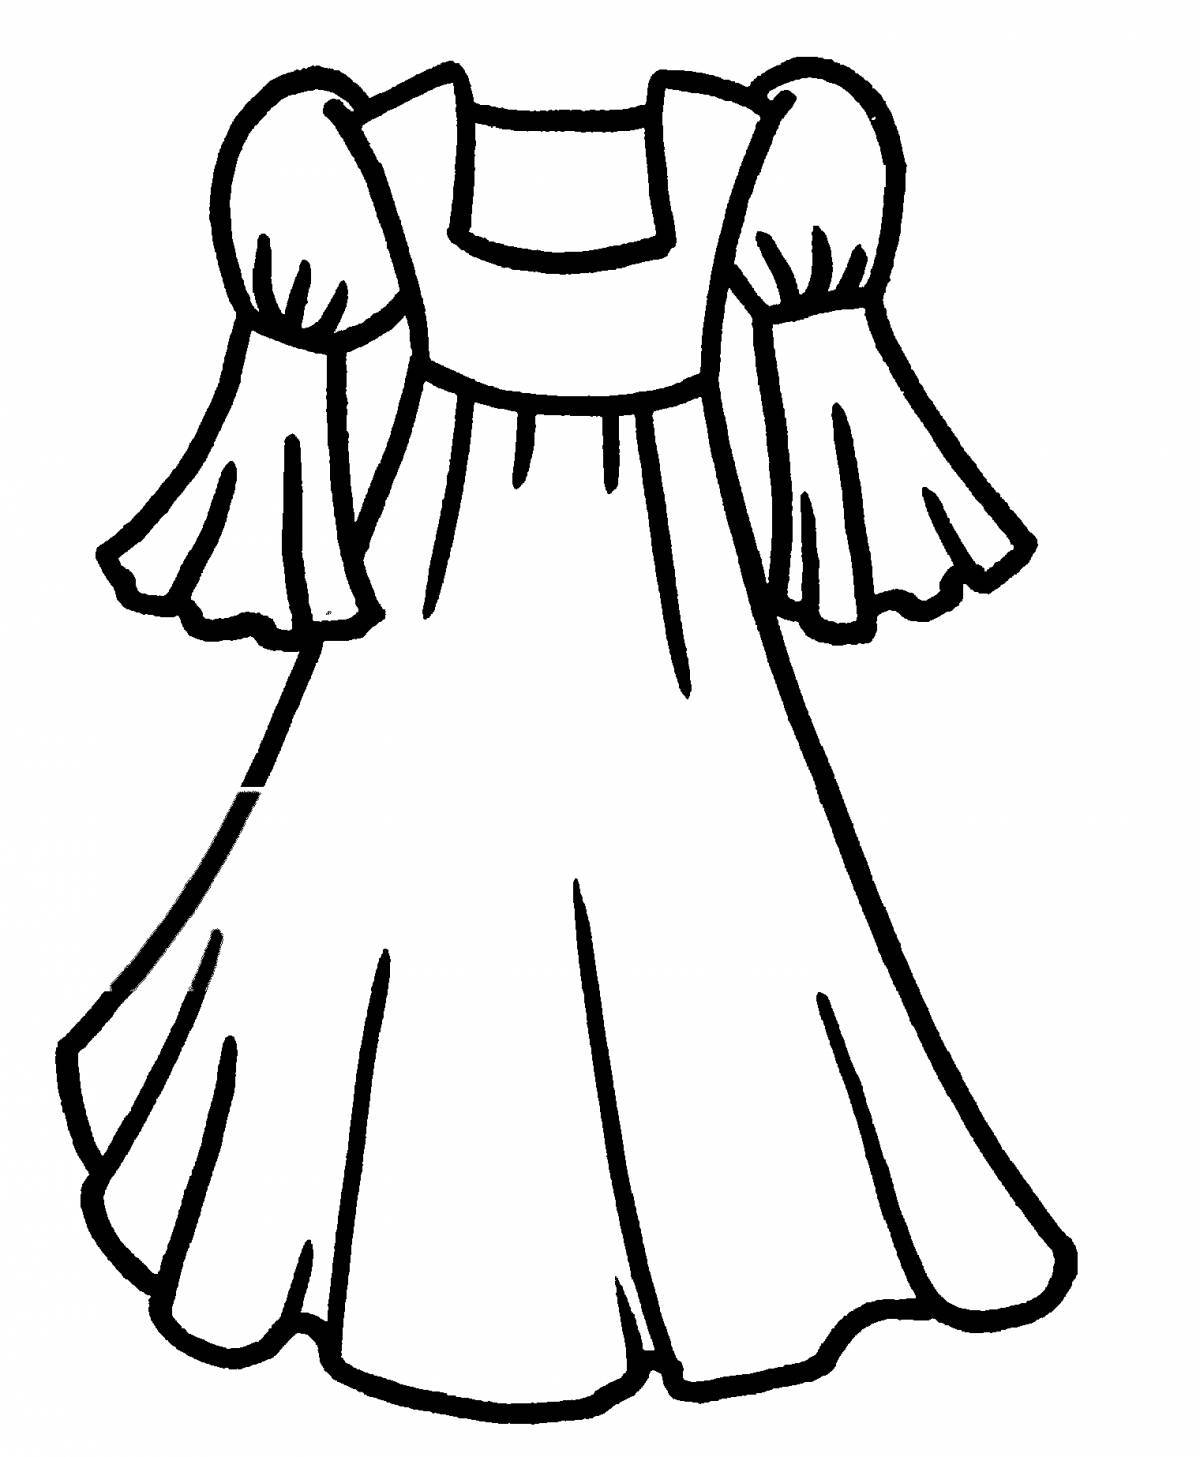 Fun dress coloring page for kids